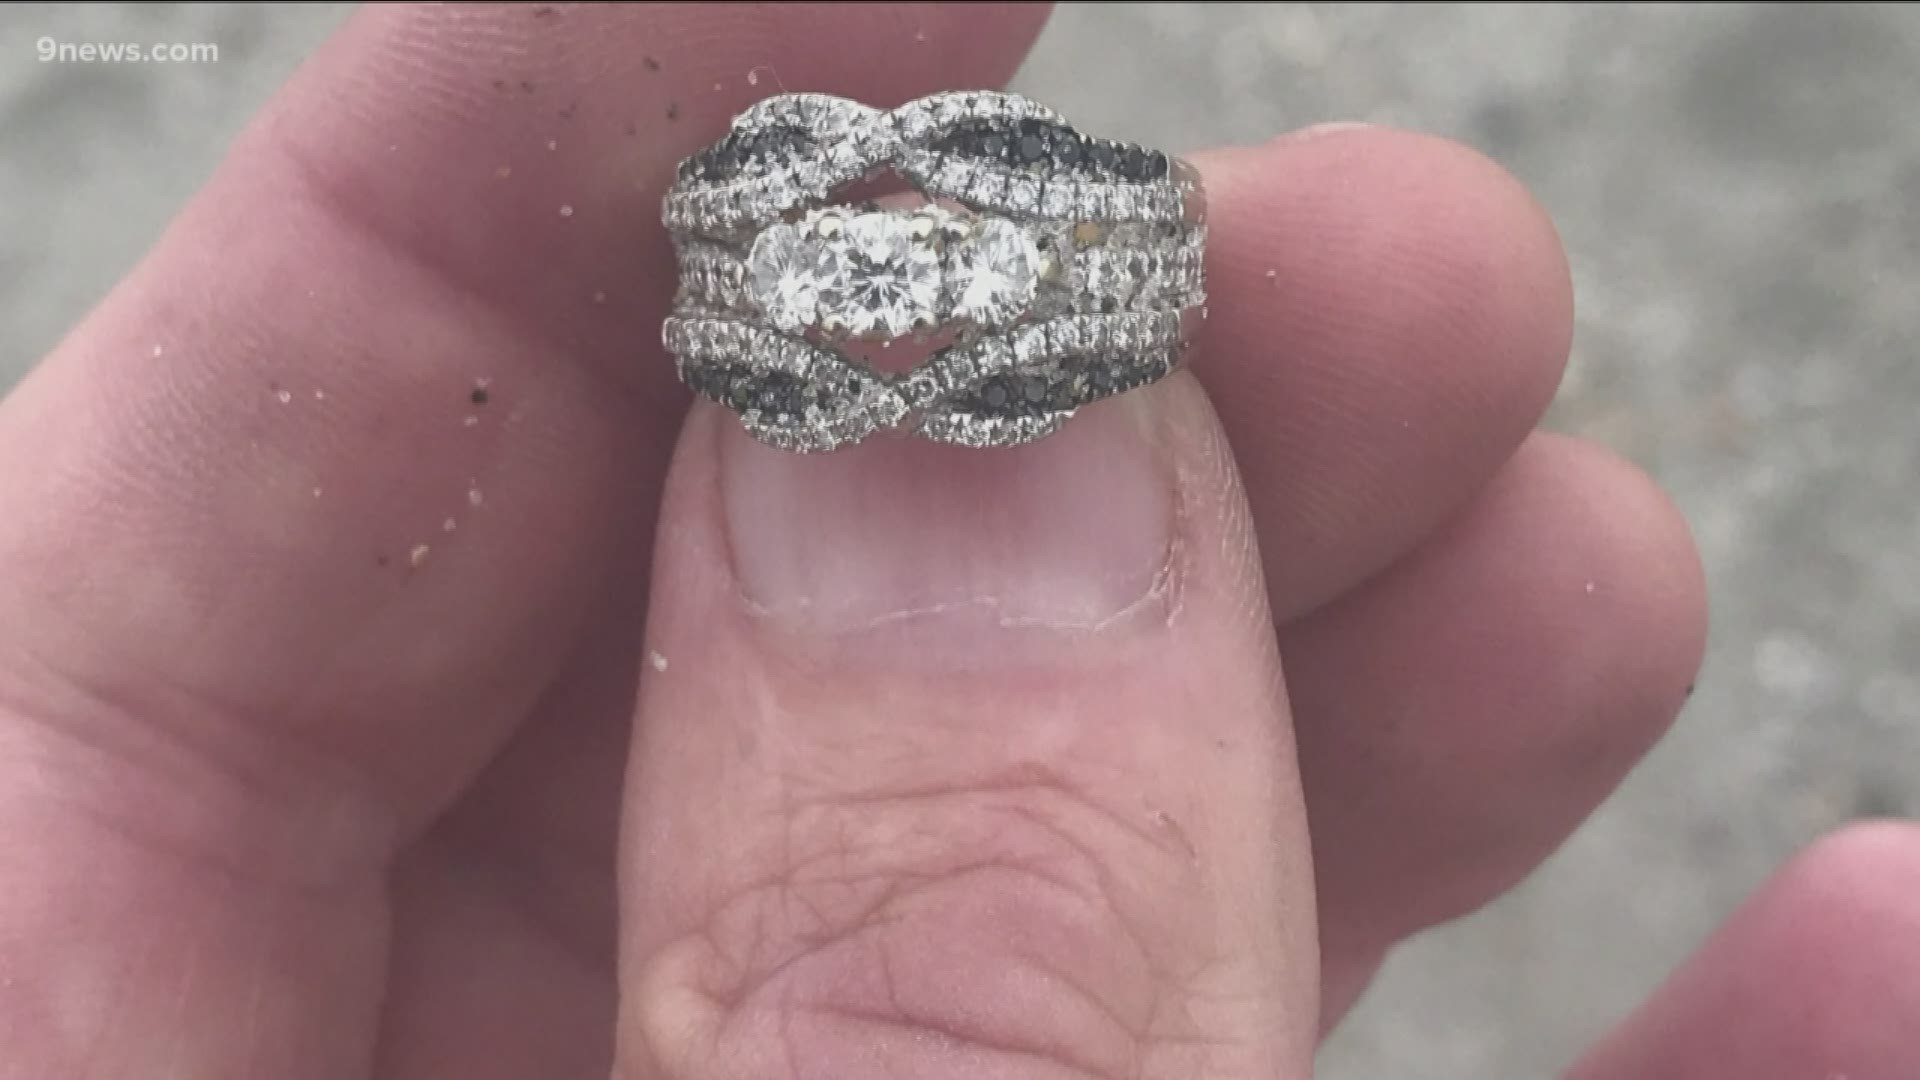 The power of social media combined with a very determined stranger helped a Colorado woman find her lost wedding ring.